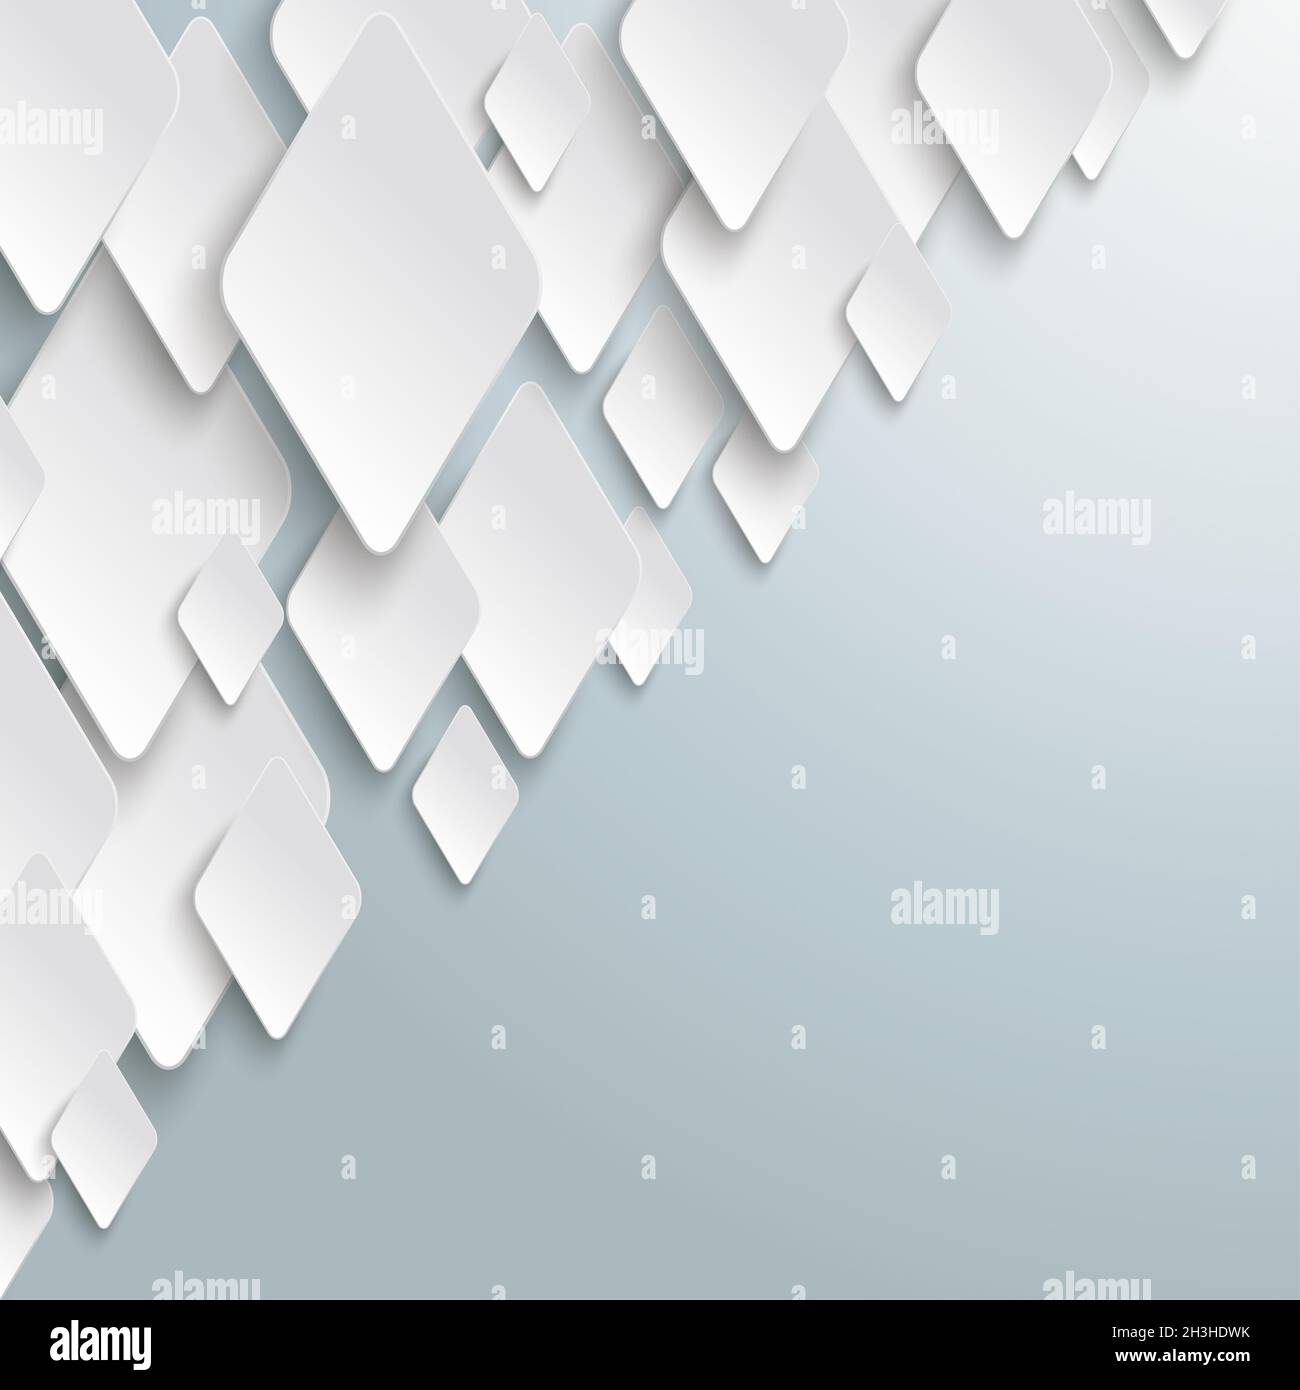 Abstract Rhombus Background PiAd Stock Photo